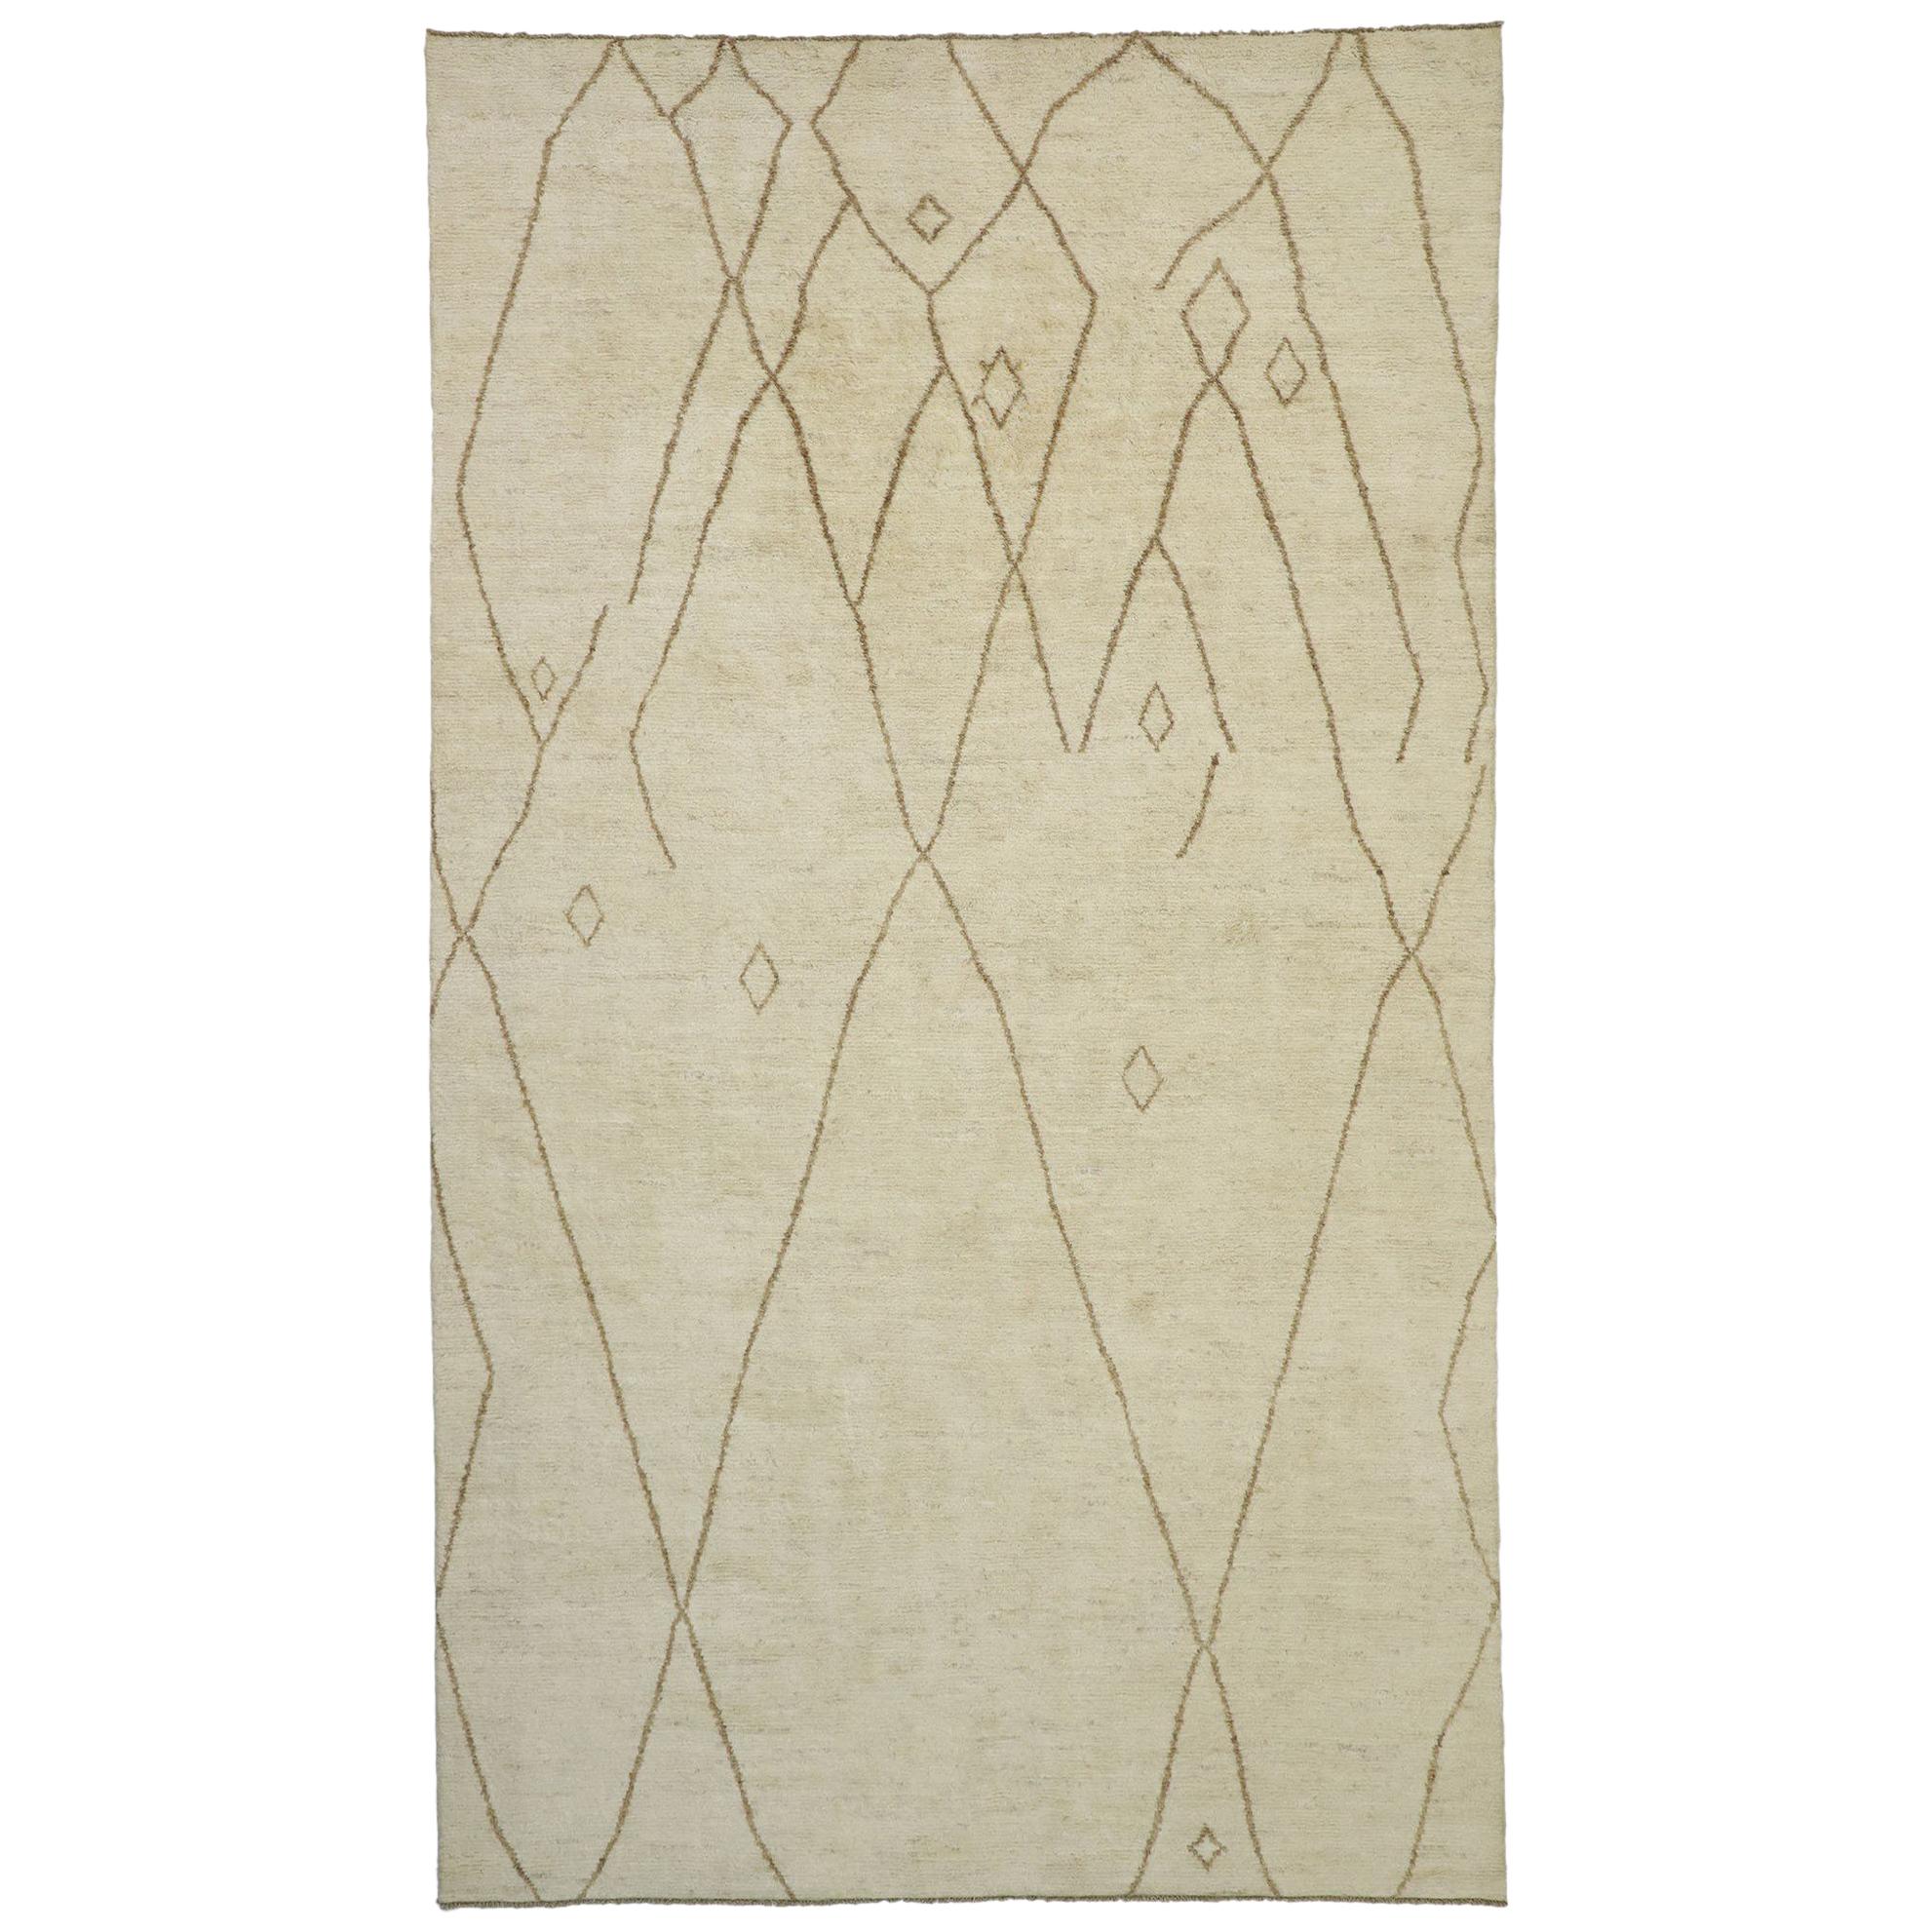 New Contemporary Moroccan Area Rug with Nomadic and Minimalist Style